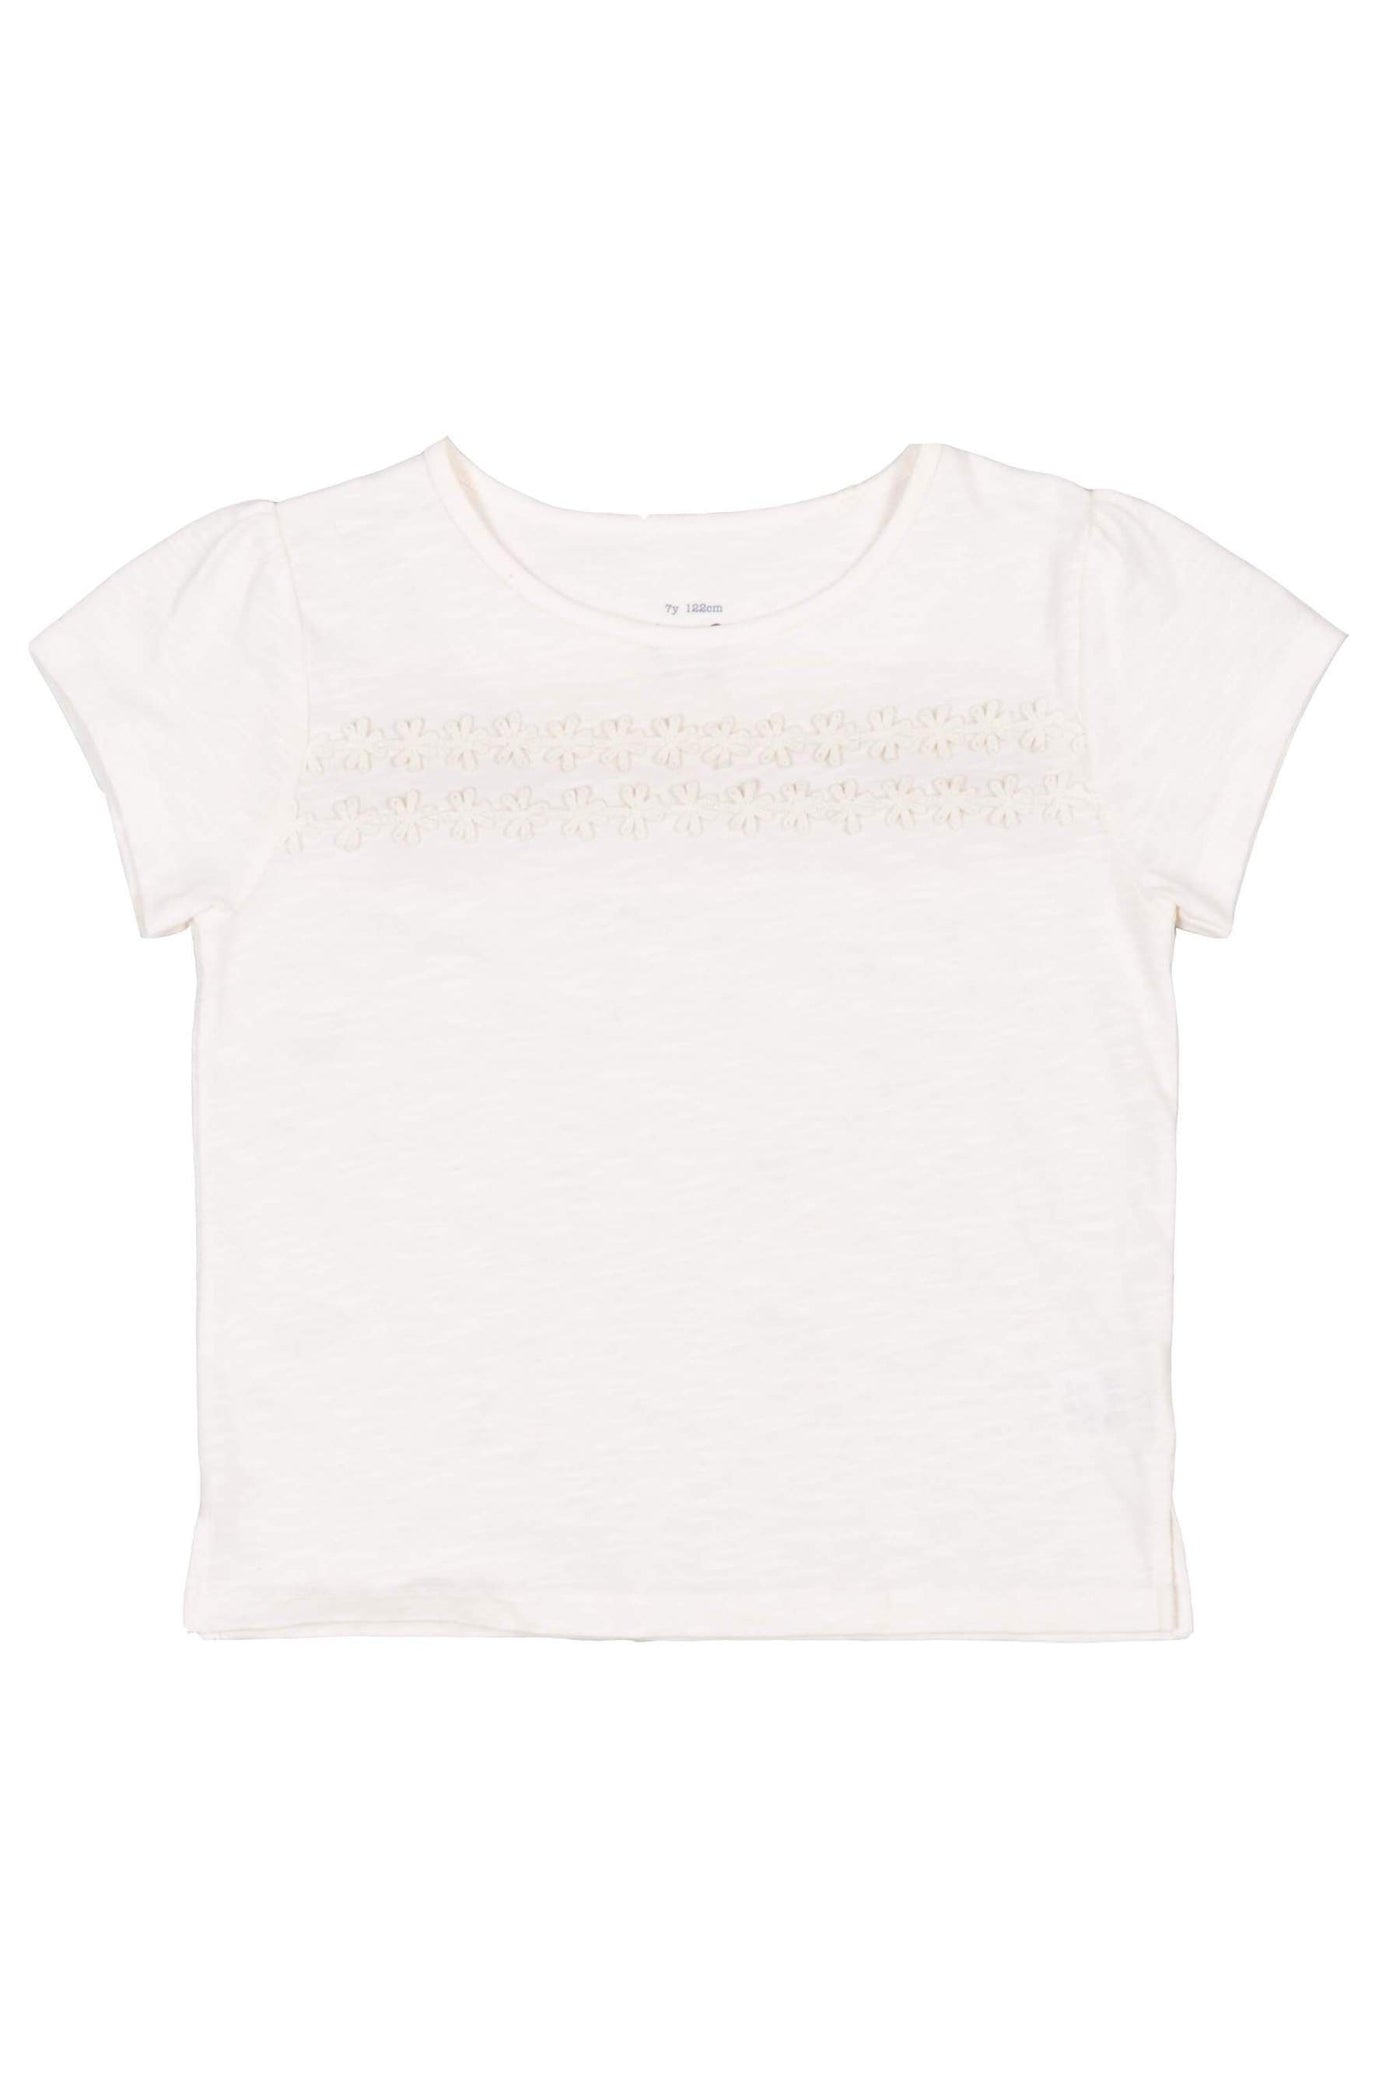 Kite Daisy T-Shirt-Kids-Ohh! By Gum - Shop Sustainable